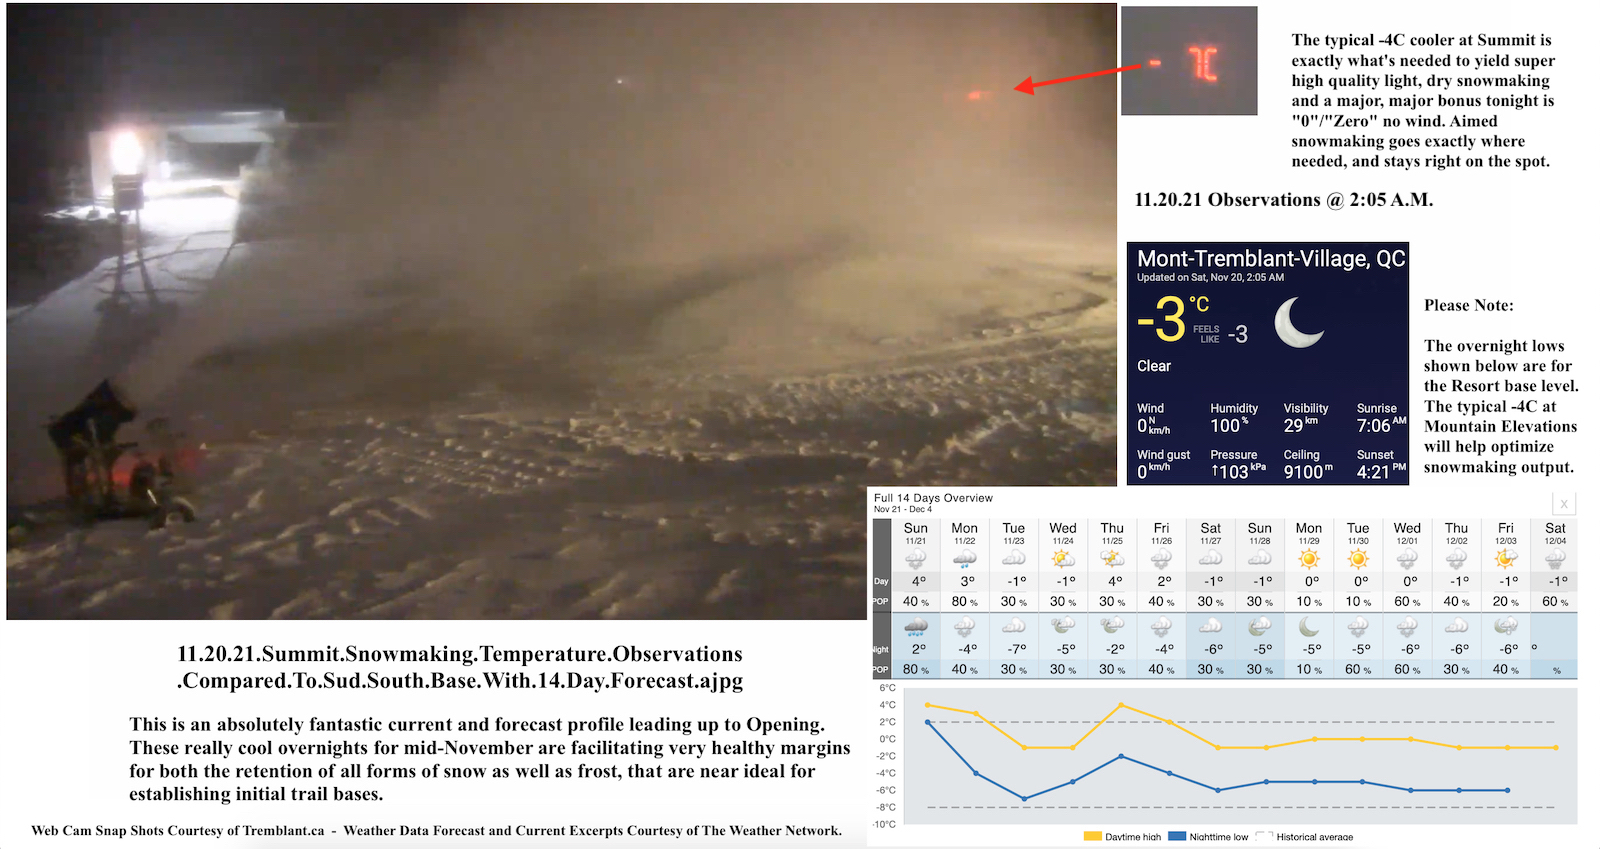 11.20.21.Summit.Snowmaking.Temperature.Observations .Compared.To.Sud.South.Base.With.14.Day.Forecast.a.jpg